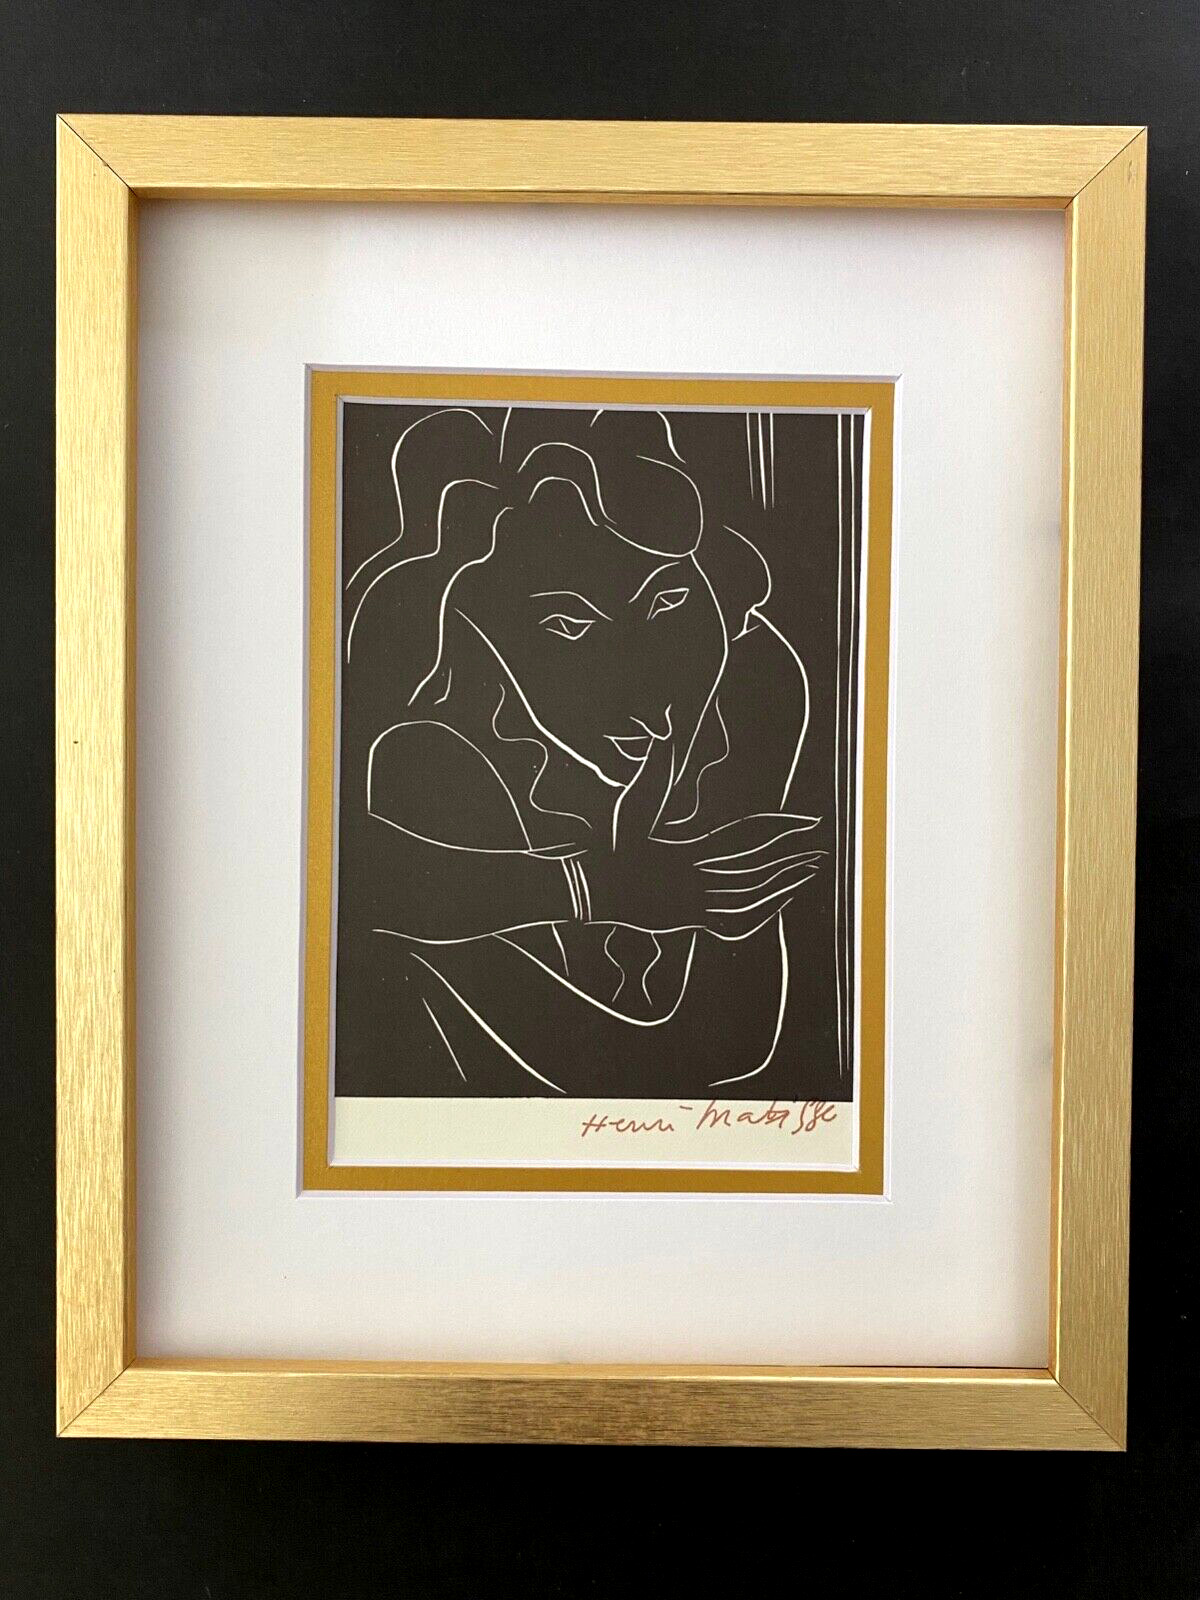 HENRI MATISSE CIRCA 1954 AWESOME SIGNED PRINT MATTED AND FRAMED + BUY IT NOW